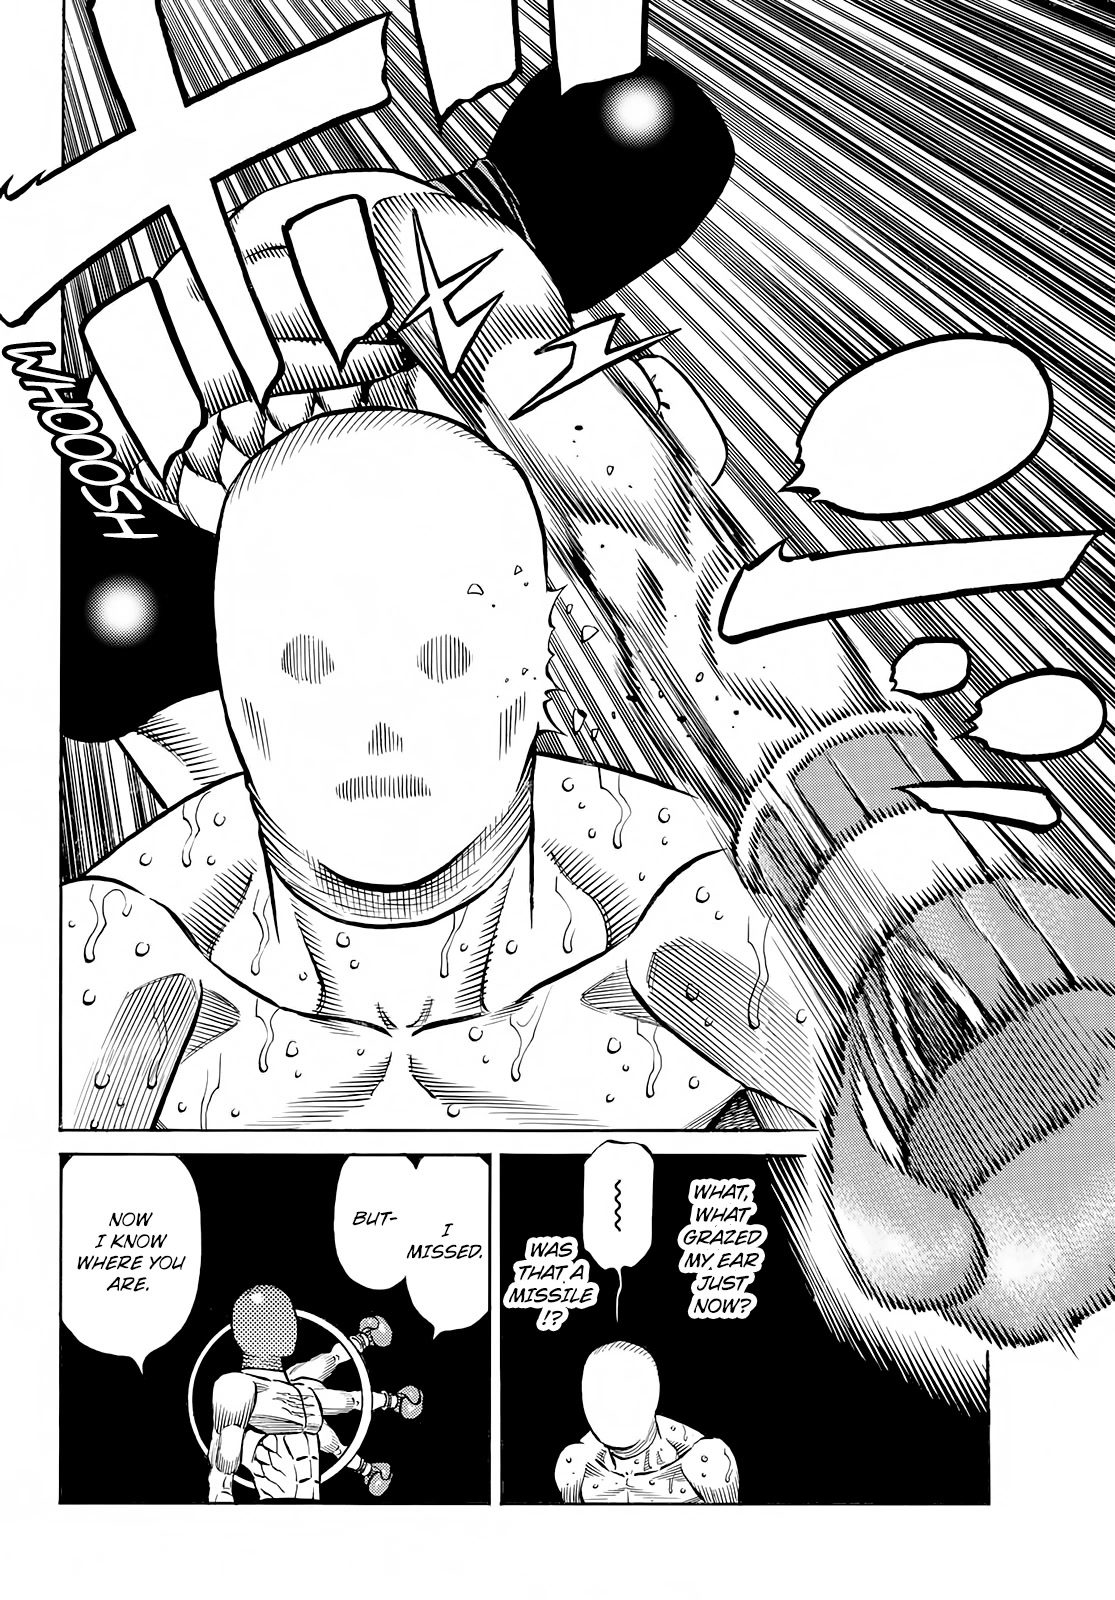 Hajime no Ippo, Chapter 1415 If You Listen Closely image 09